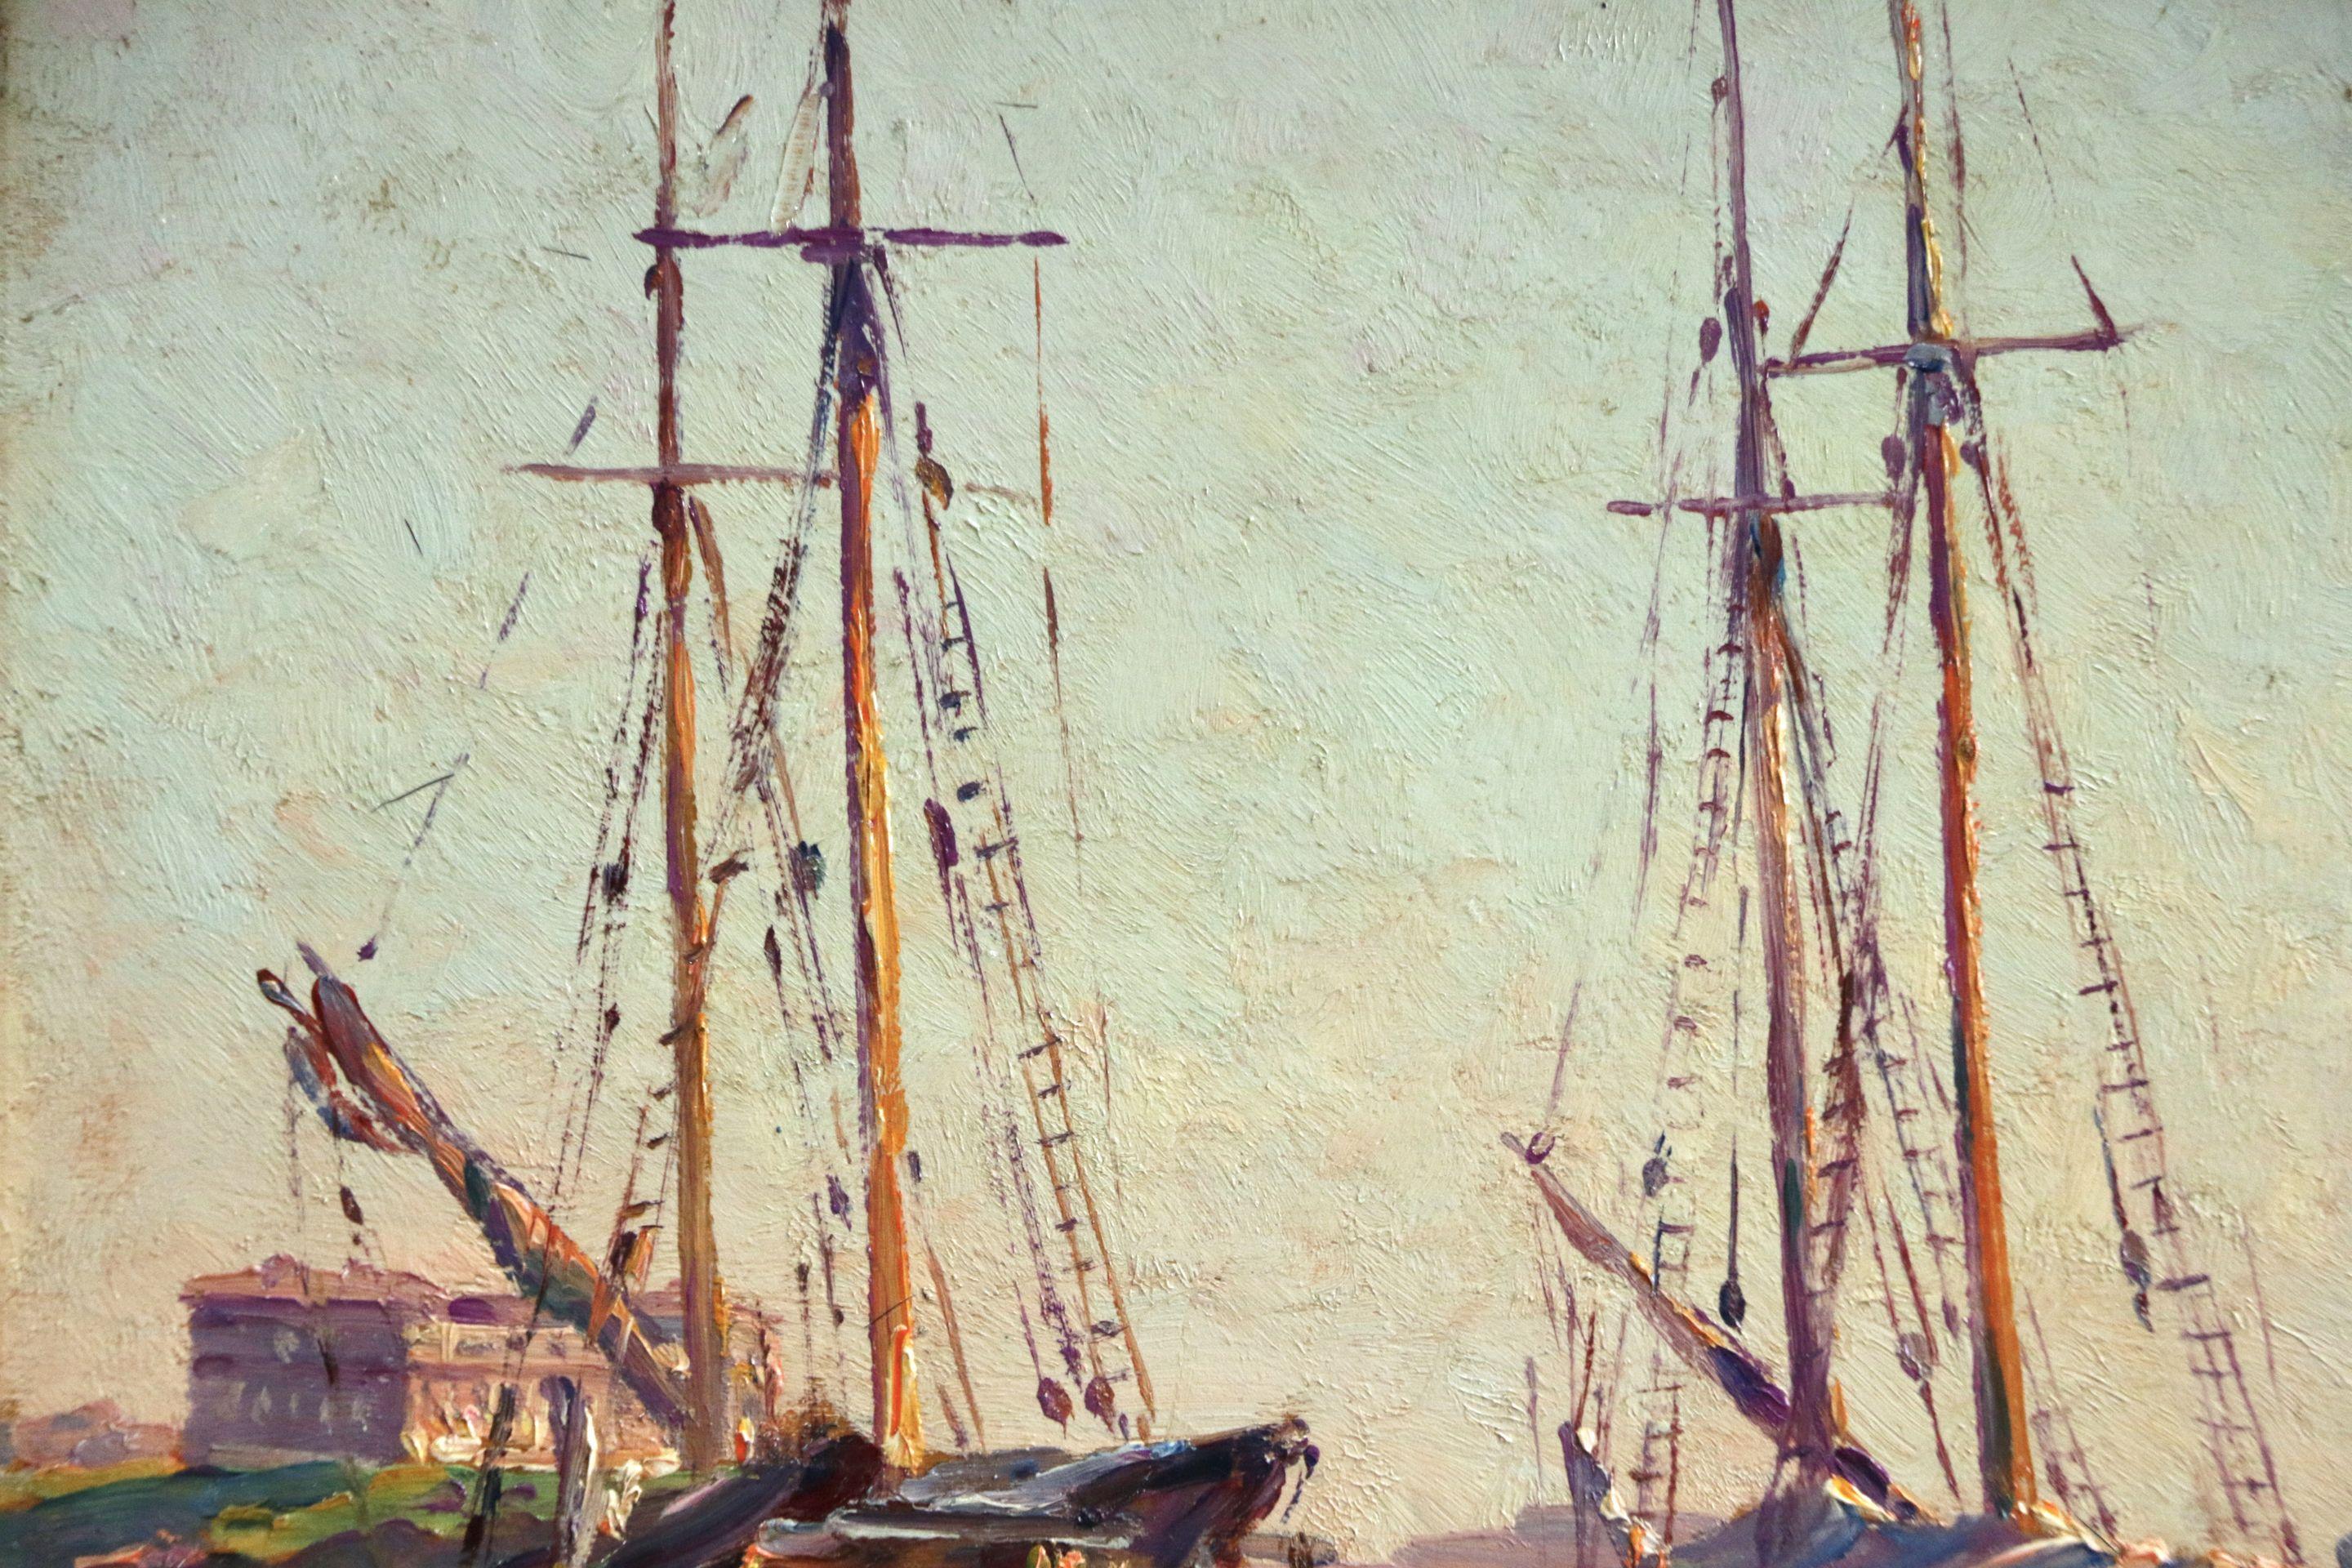 Bateaux à L'ancre - Marseille - 19th Century Marine Oil, Boats in Sea by Gaussen - Impressionist Painting by Adolphe Louis Gaussen